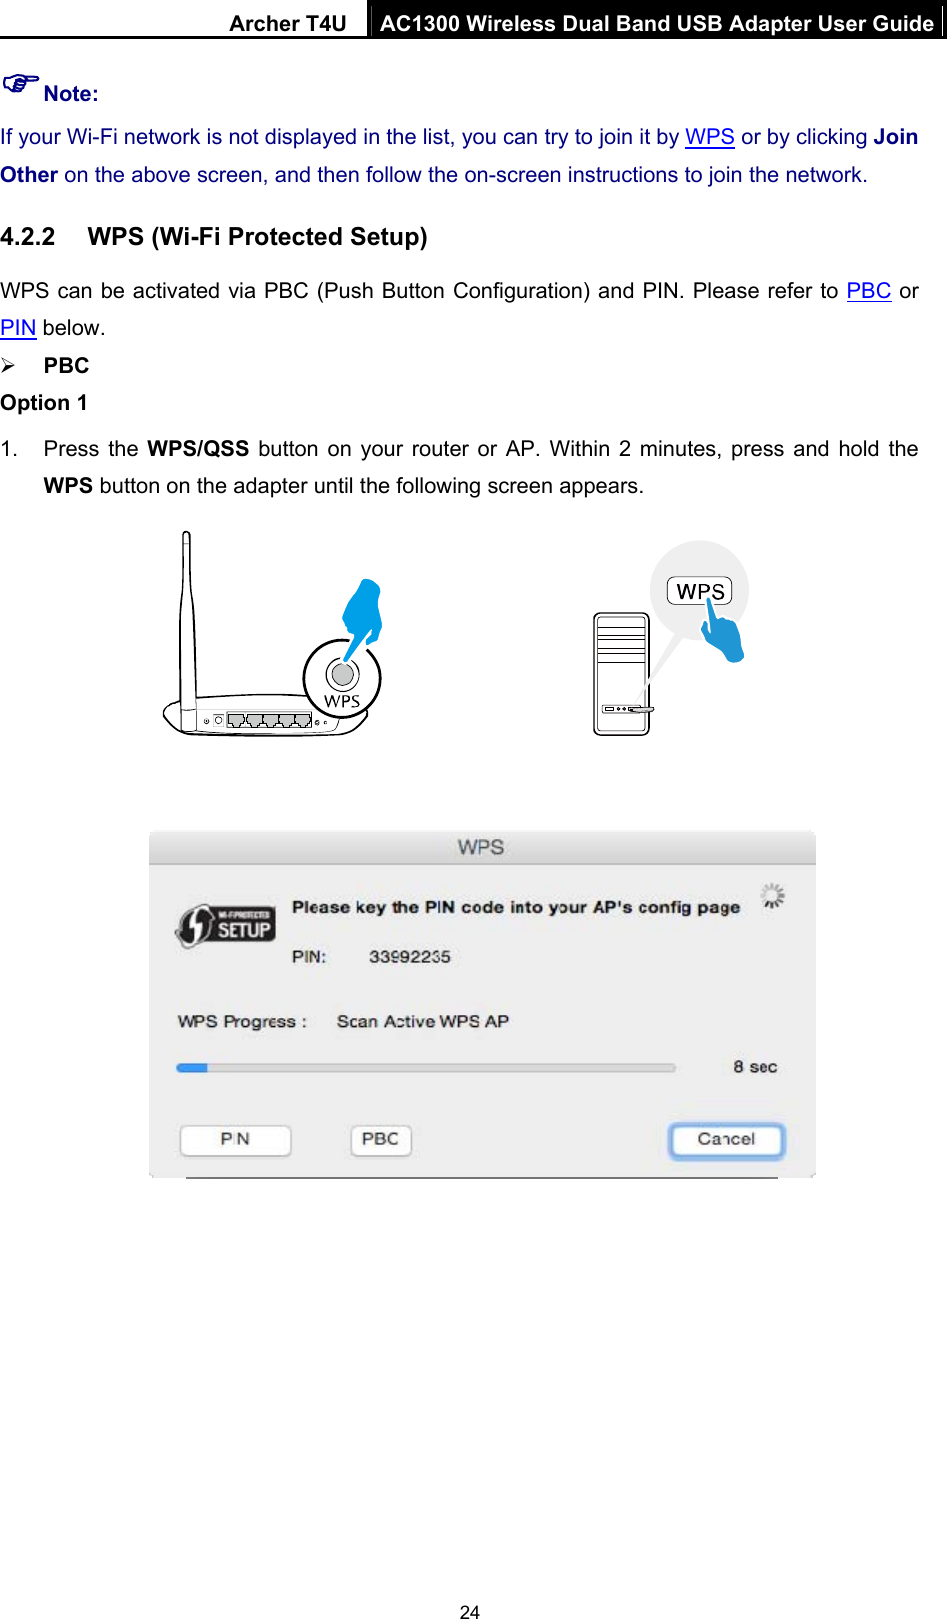 Archer T4U  AC1300 Wireless Dual Band USB Adapter User Guide 24  Note:   If your Wi-Fi network is not displayed in the list, you can try to join it by WPS or by clicking Join Other on the above screen, and then follow the on-screen instructions to join the network. 4.2.2  WPS (Wi-Fi Protected Setup) WPS can be activated via PBC (Push Button Configuration) and PIN. Please refer to PBC or PIN below.  PBC Option 1 1. Press the WPS/QSS button on your router or AP. Within 2 minutes, press and hold the WPS button on the adapter until the following screen appears.                            